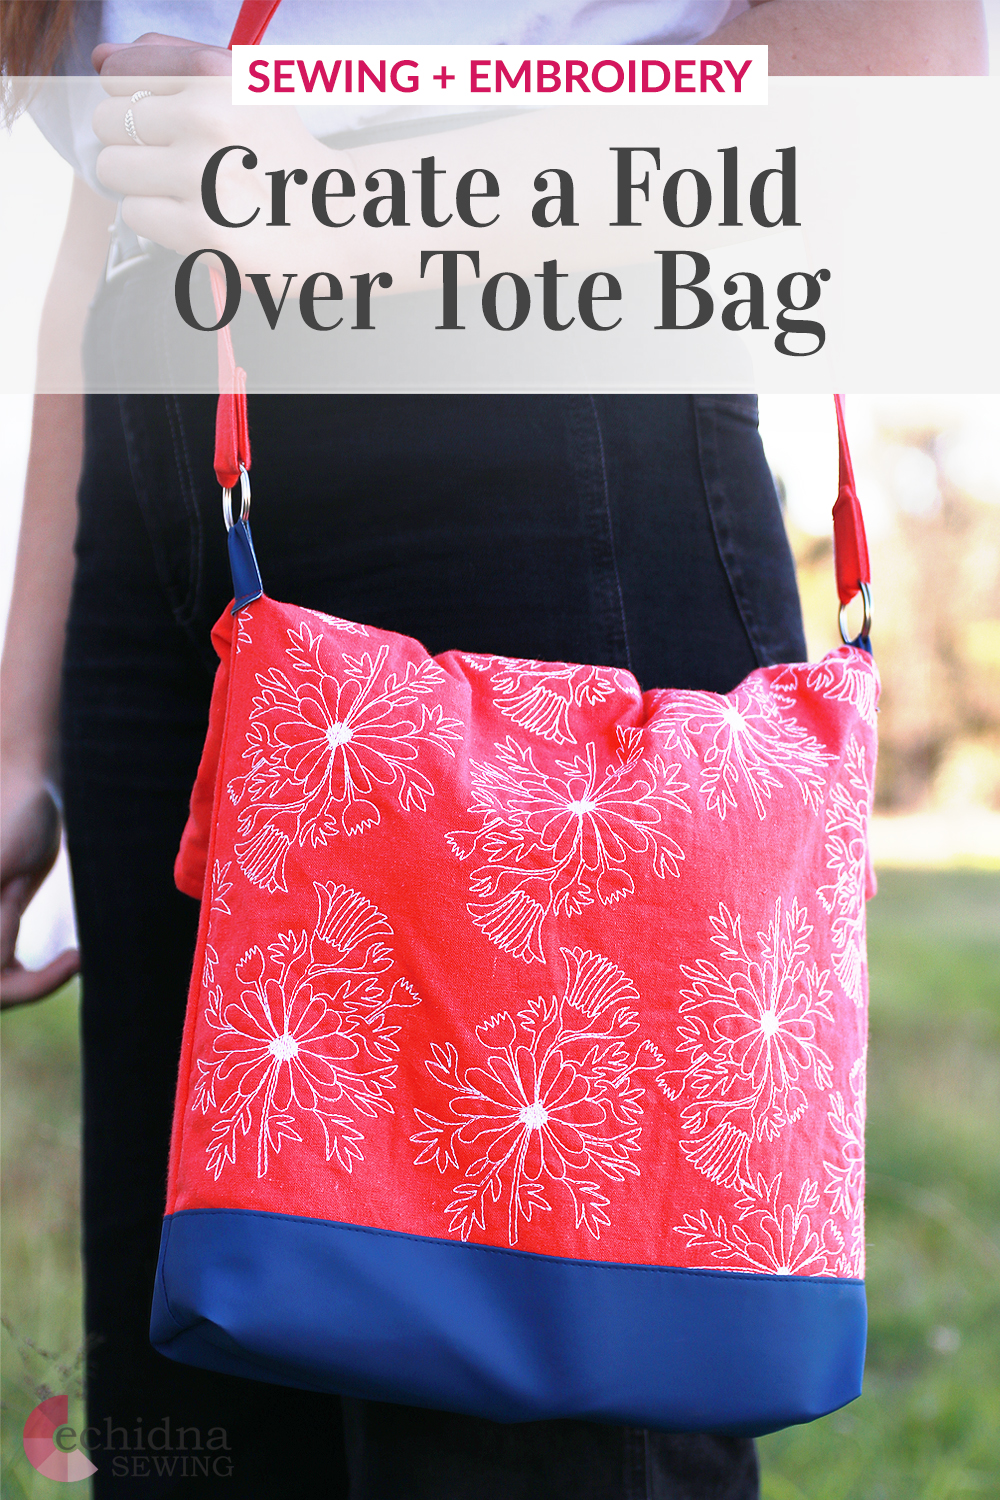 Create your very own Fold Over Tote Bag! | Echidna Sewing